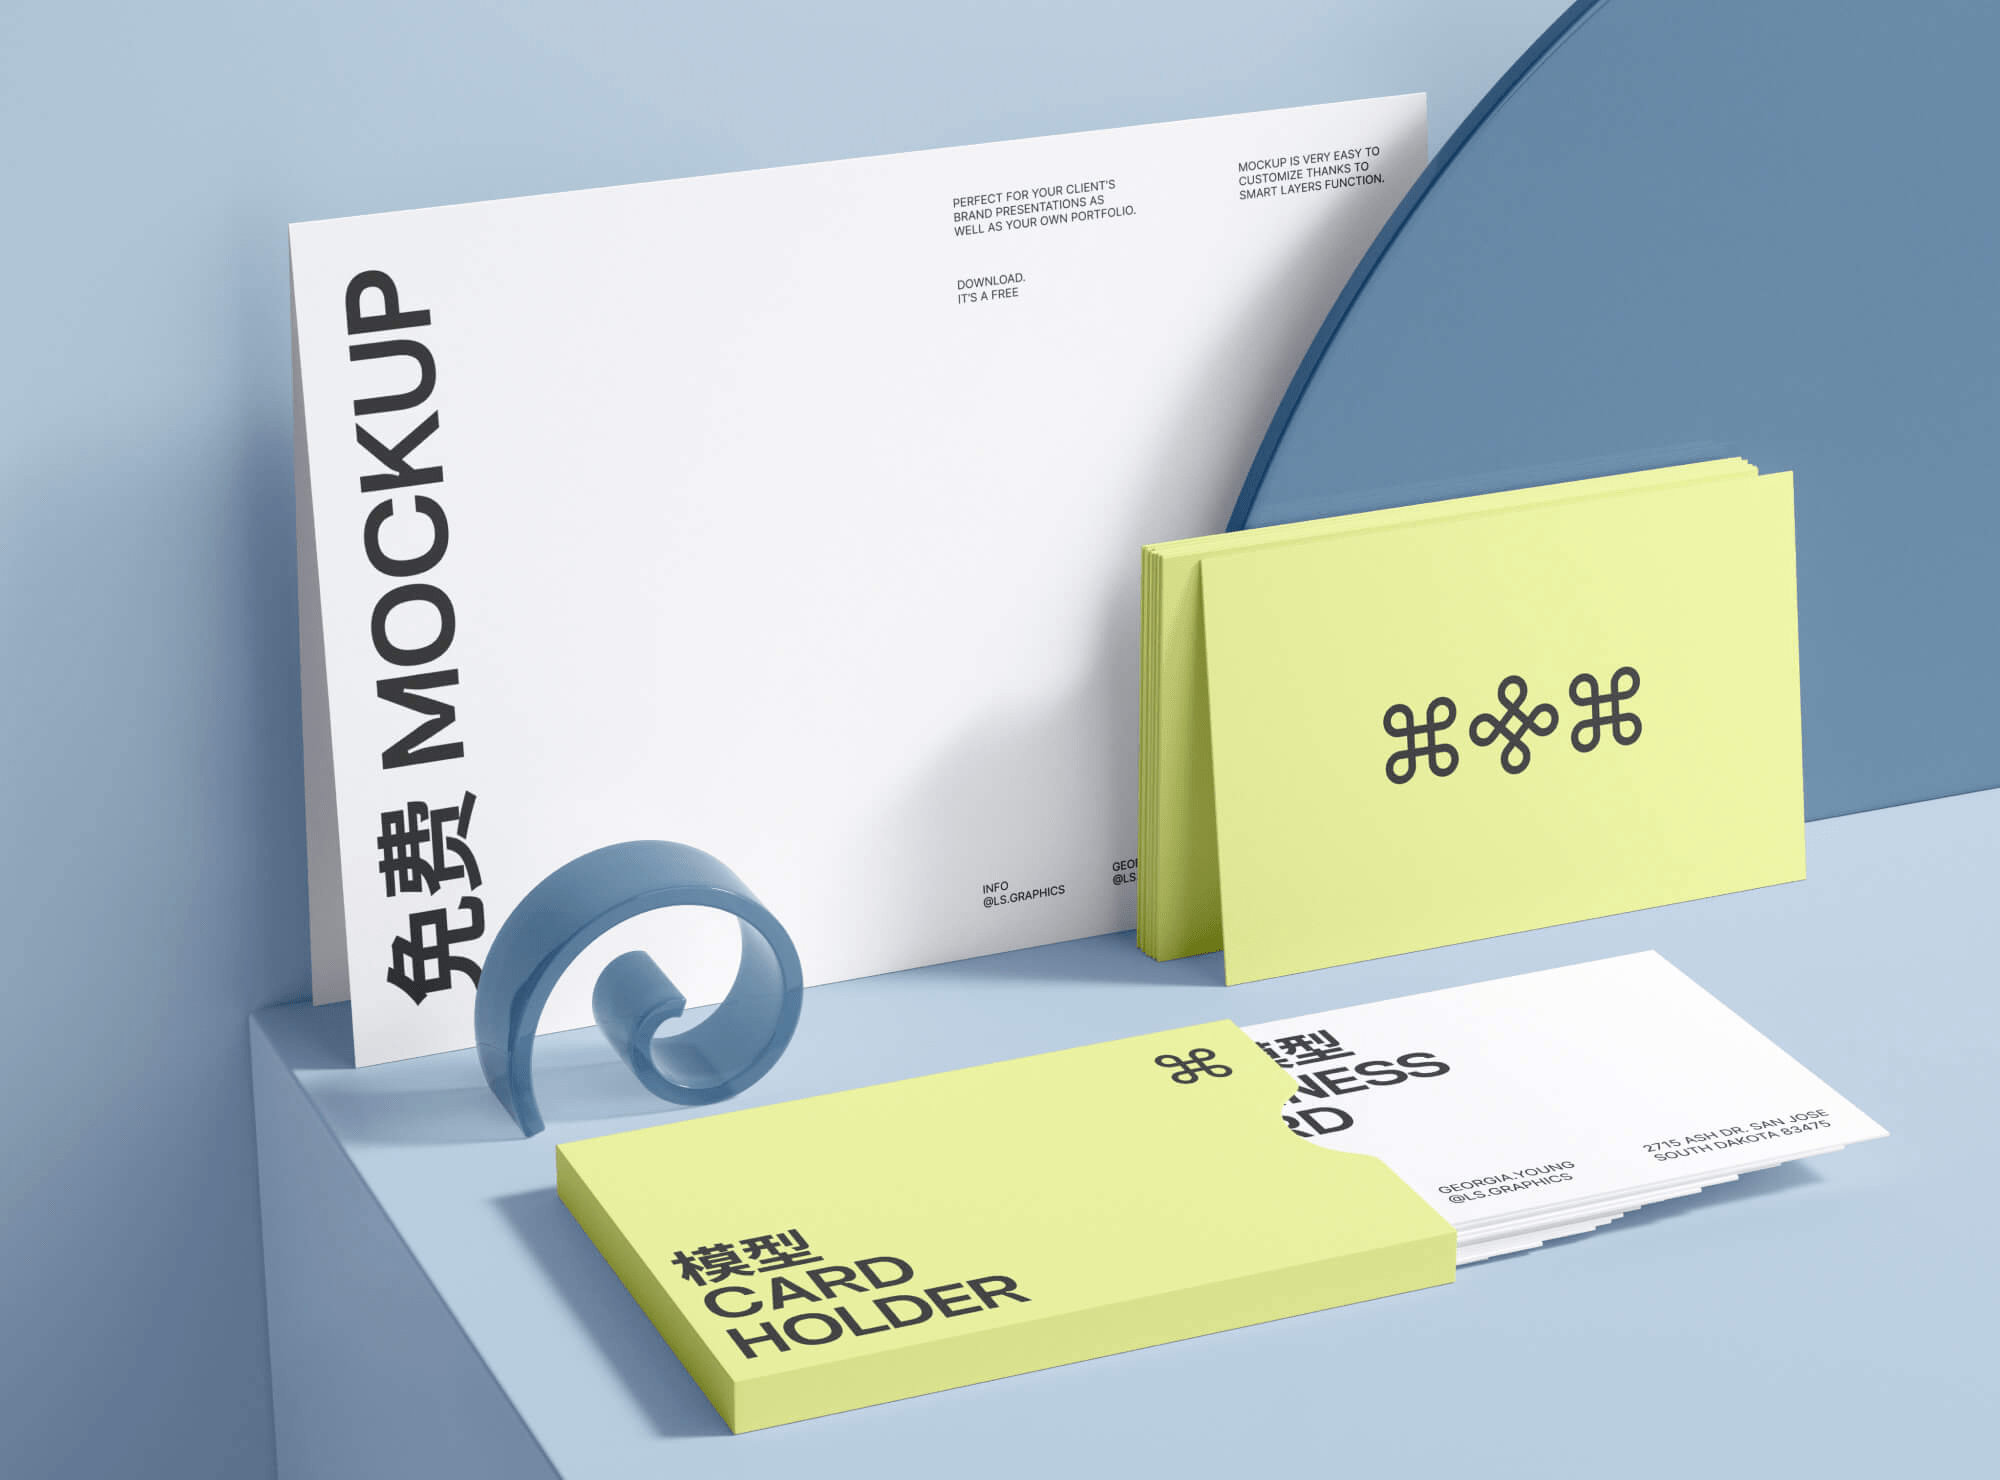 High-quality image of Paper and Business Cards Mockup, showcasing detailed textures and design placement.